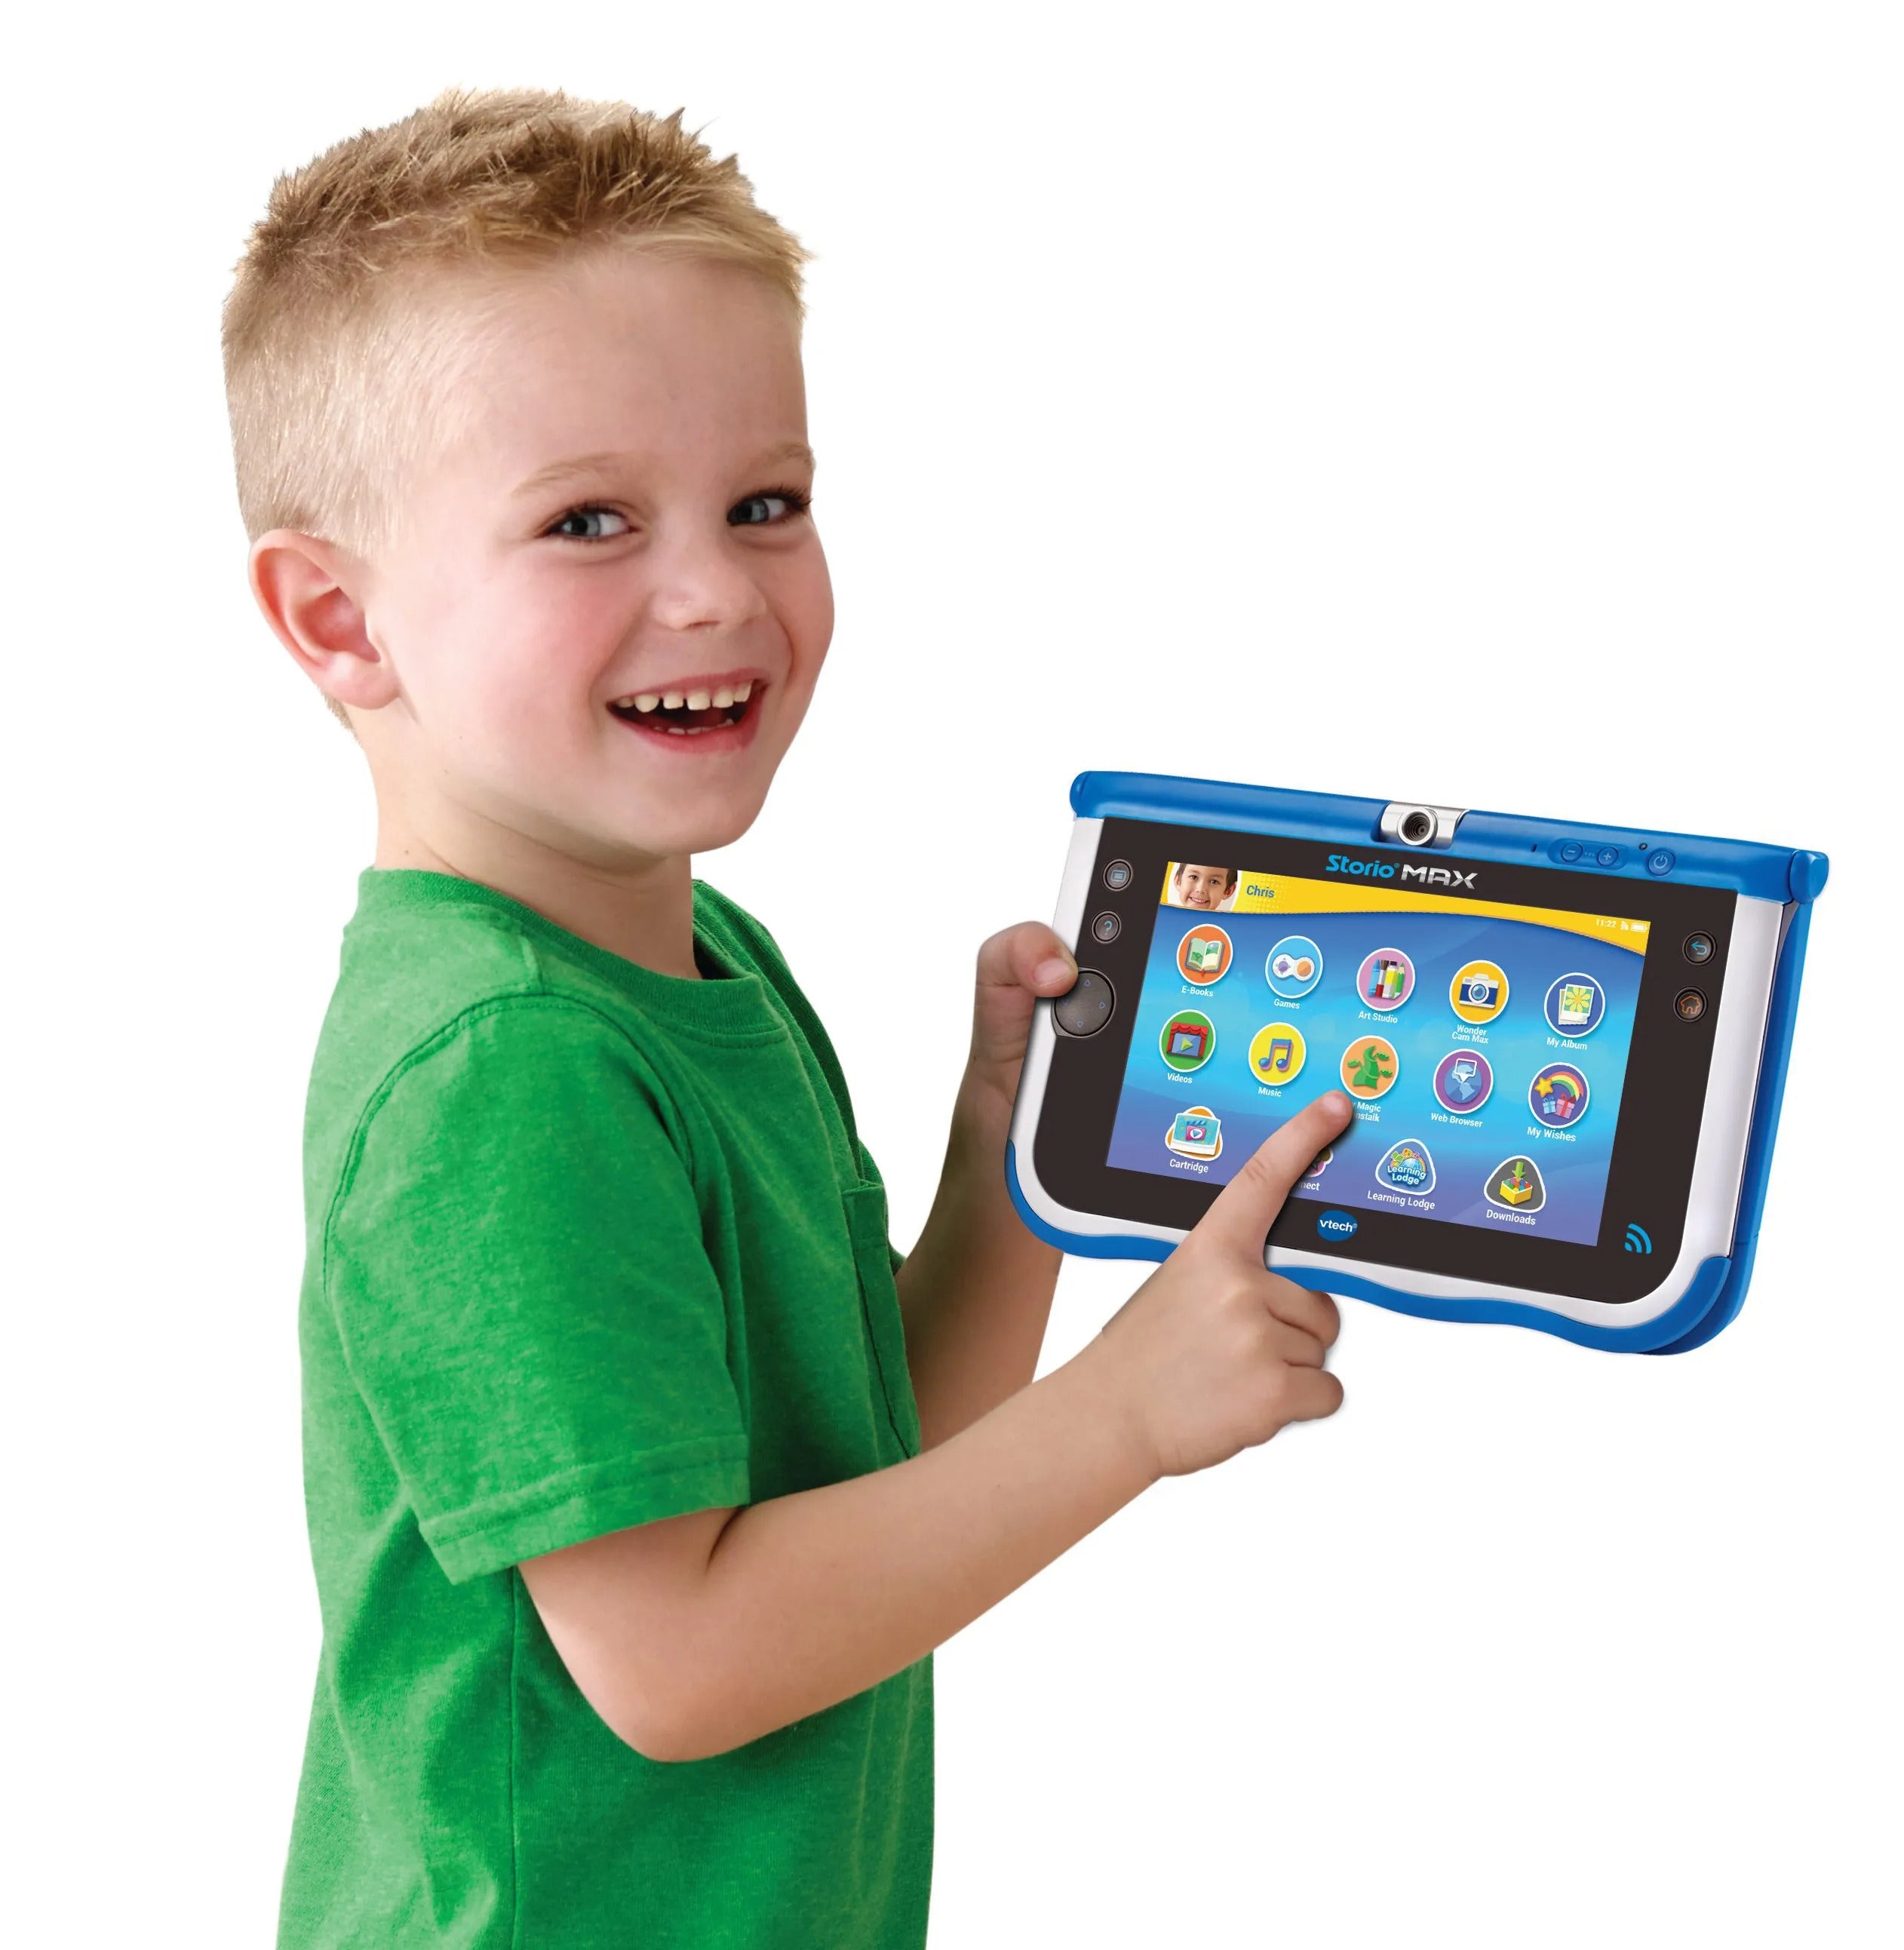 Vtech Tablet Storio Max XL 2.0 French 3+ Years